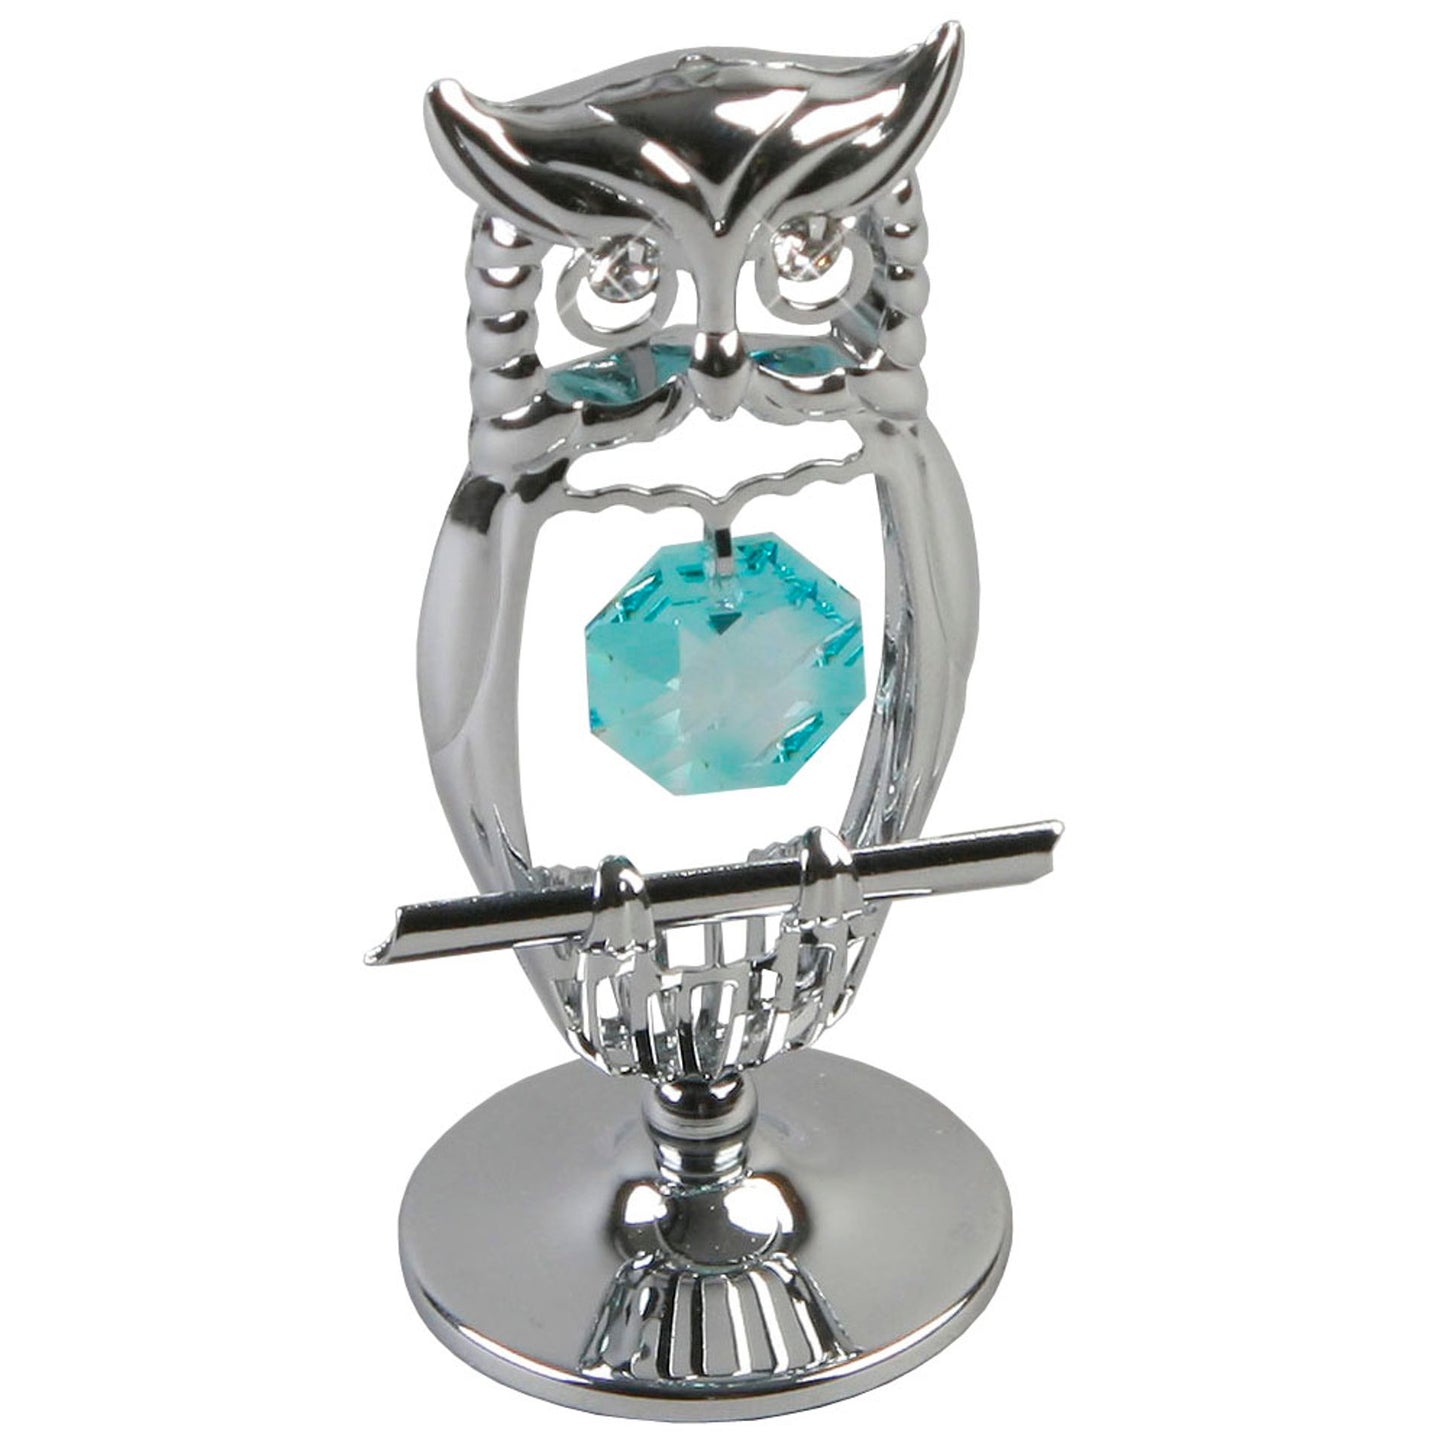 Crystocraft Owl Ornament